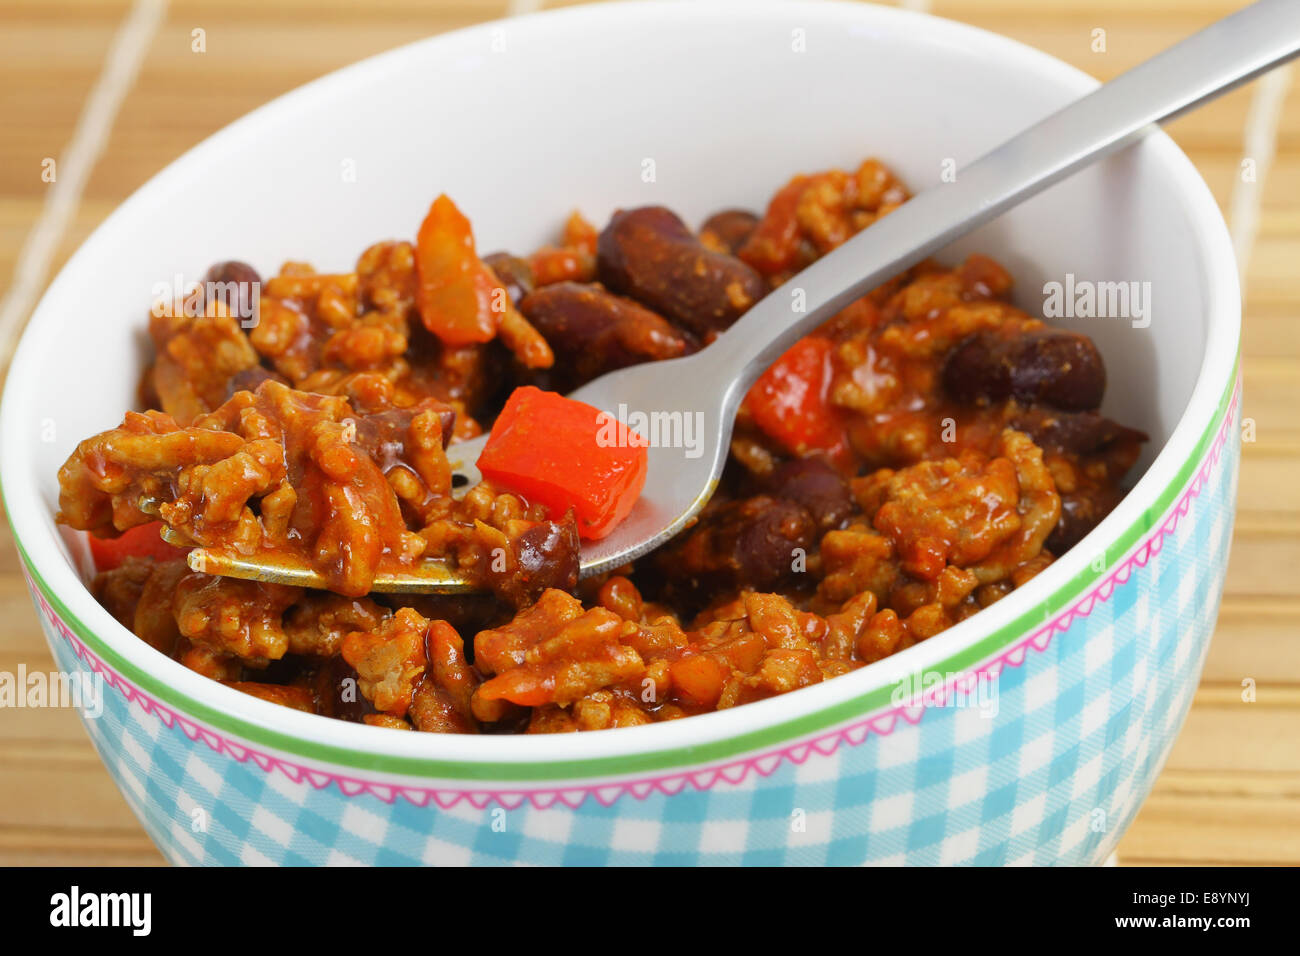 Chili con carne in porcelain bowl, close up Stock Photo